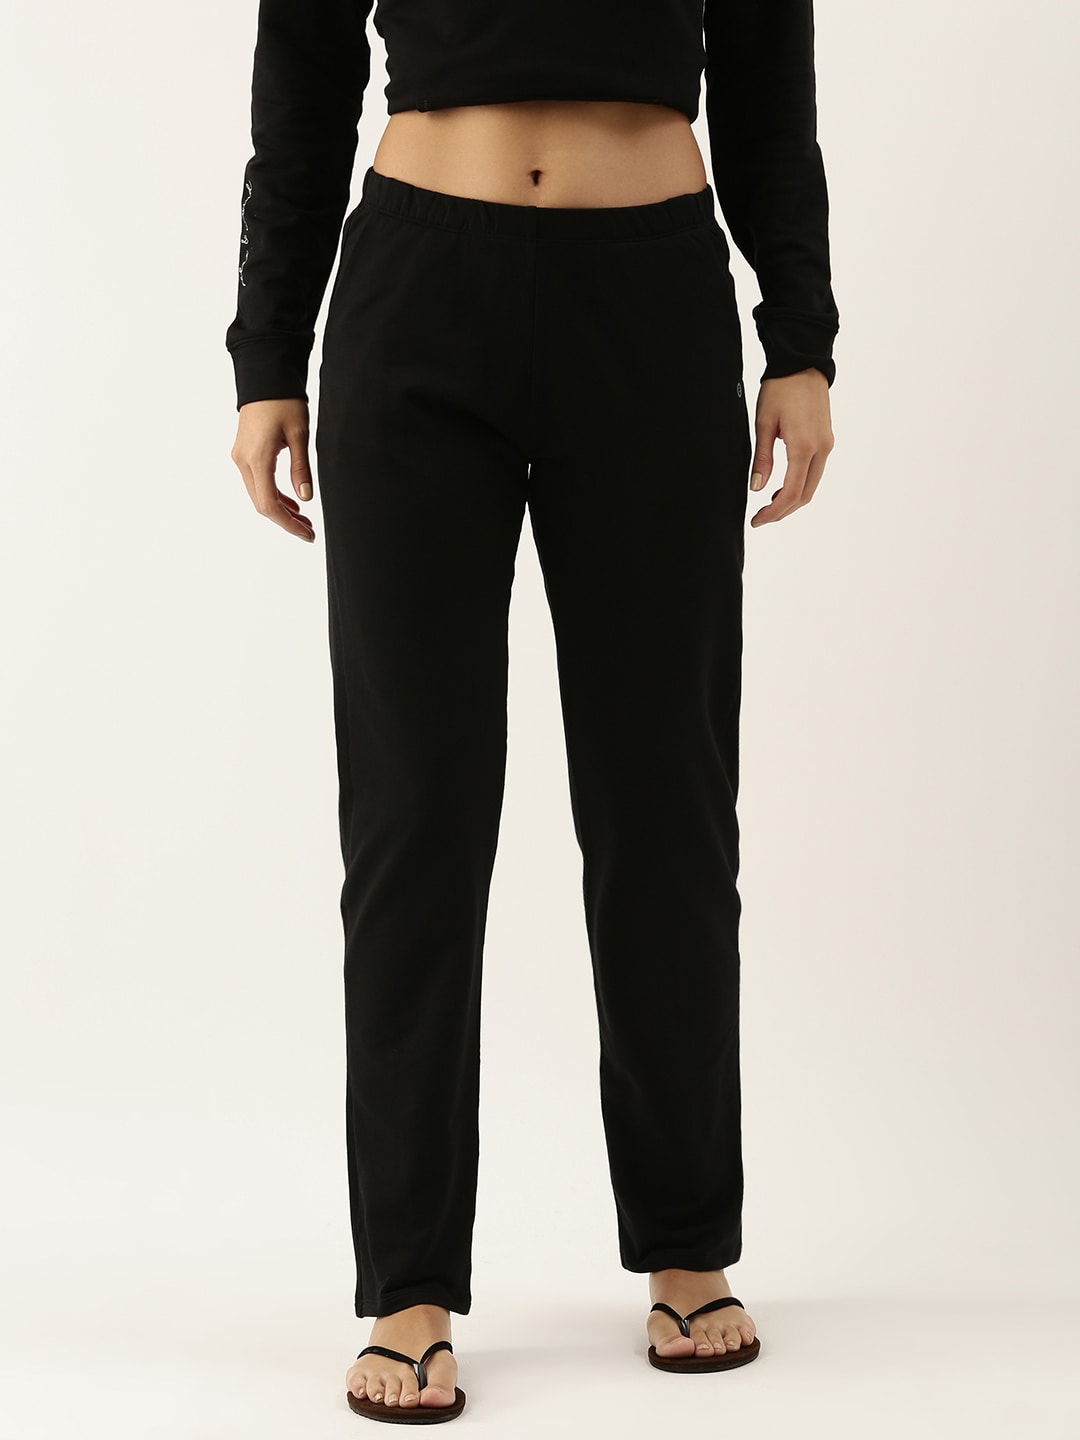 Enamor Womens Black Essential Cotton Terry Lounge Pants Price in India